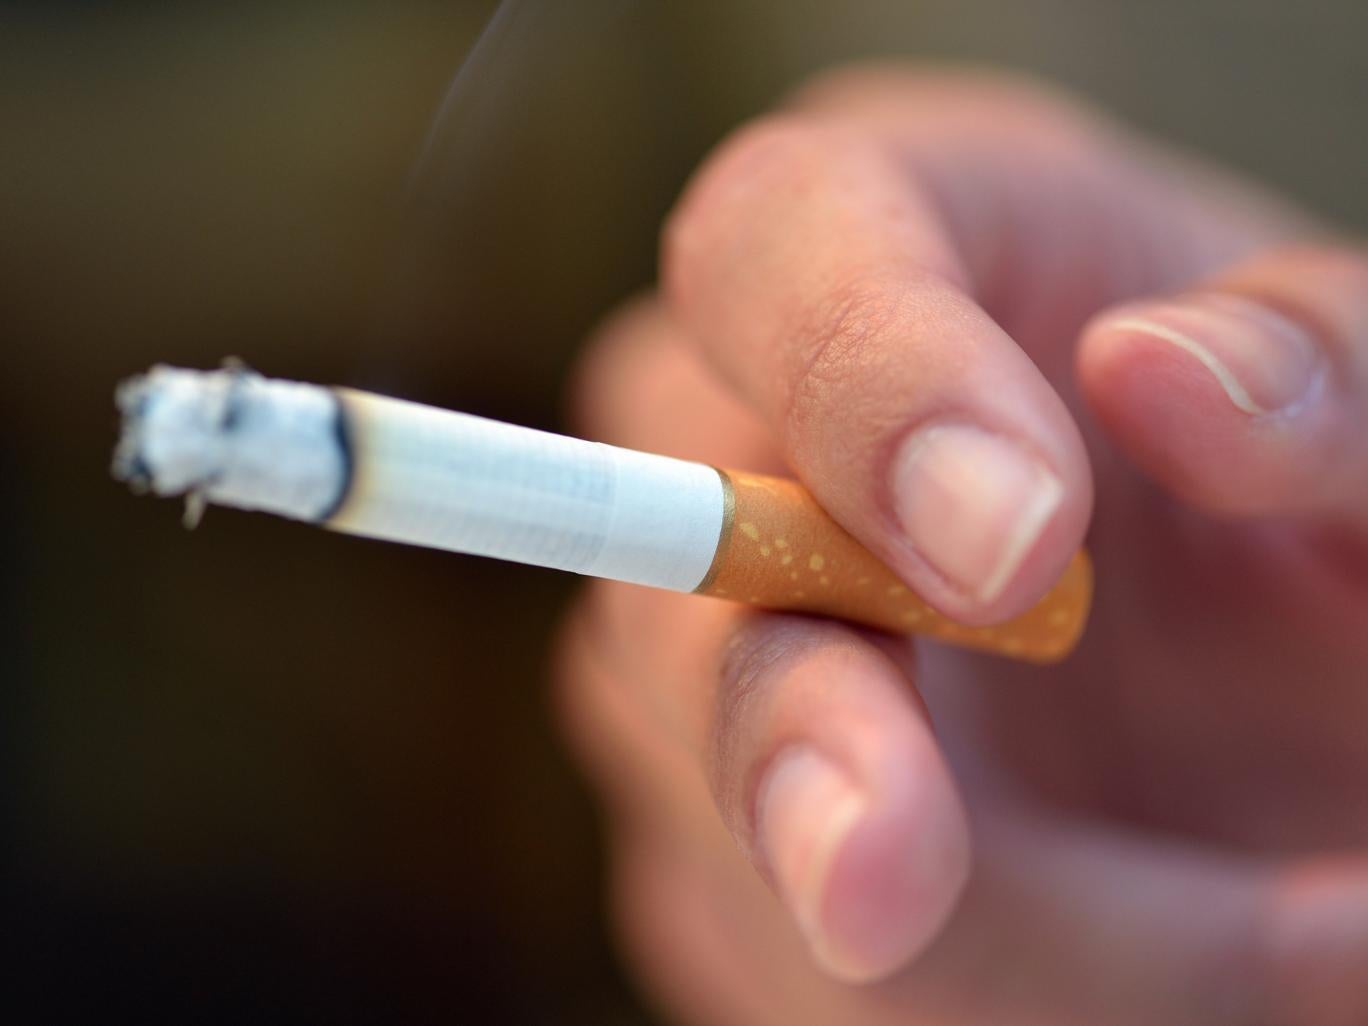 The study is the first to quantify the degree of damage that smoking does to our DNA